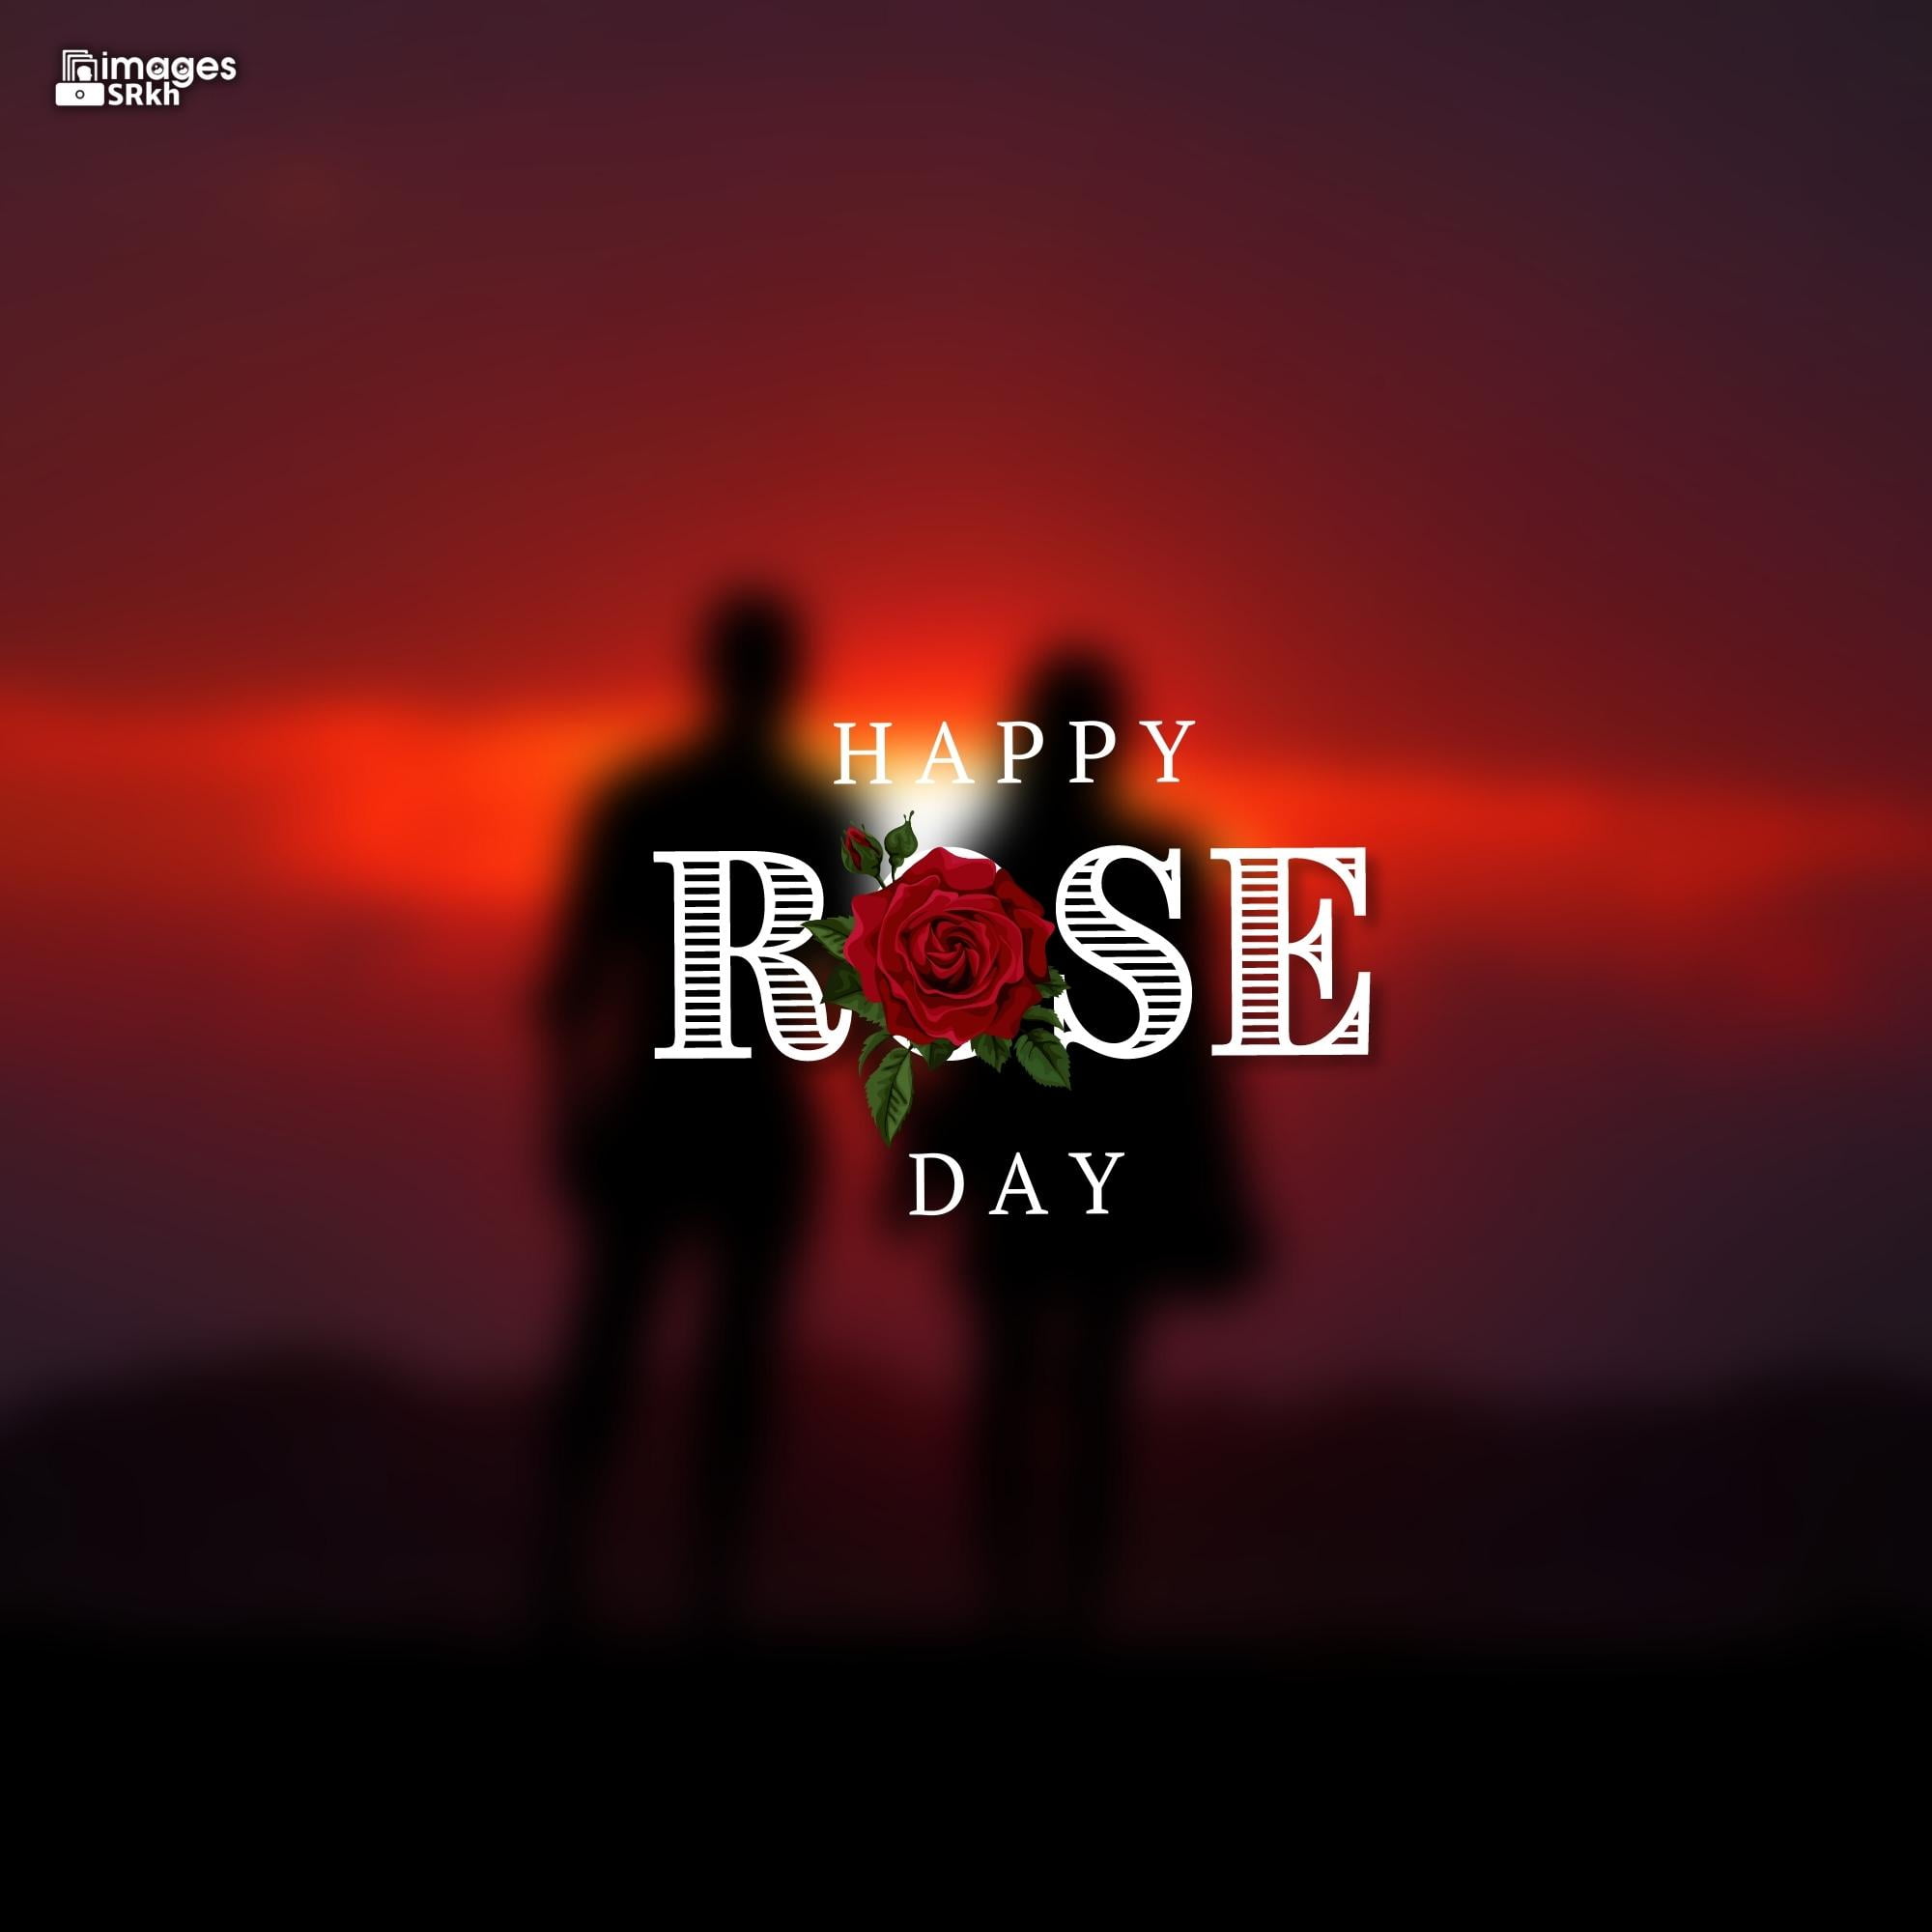 Romantic Rose Day Images Hd Download (4)